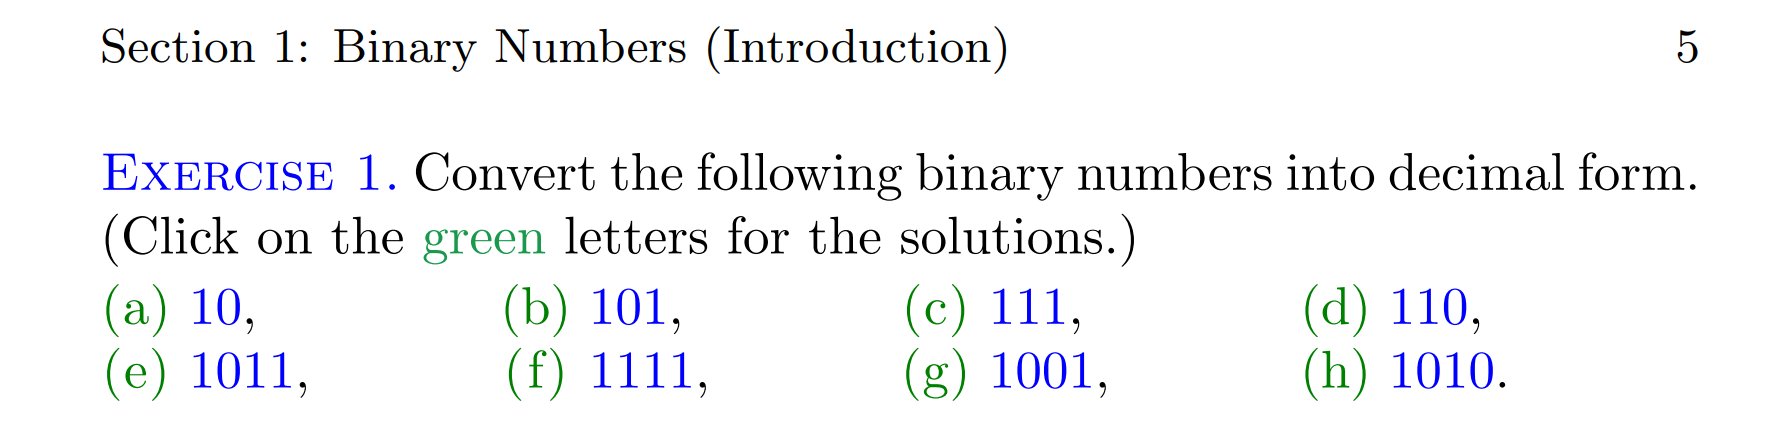 Binary Numbers - Section 1